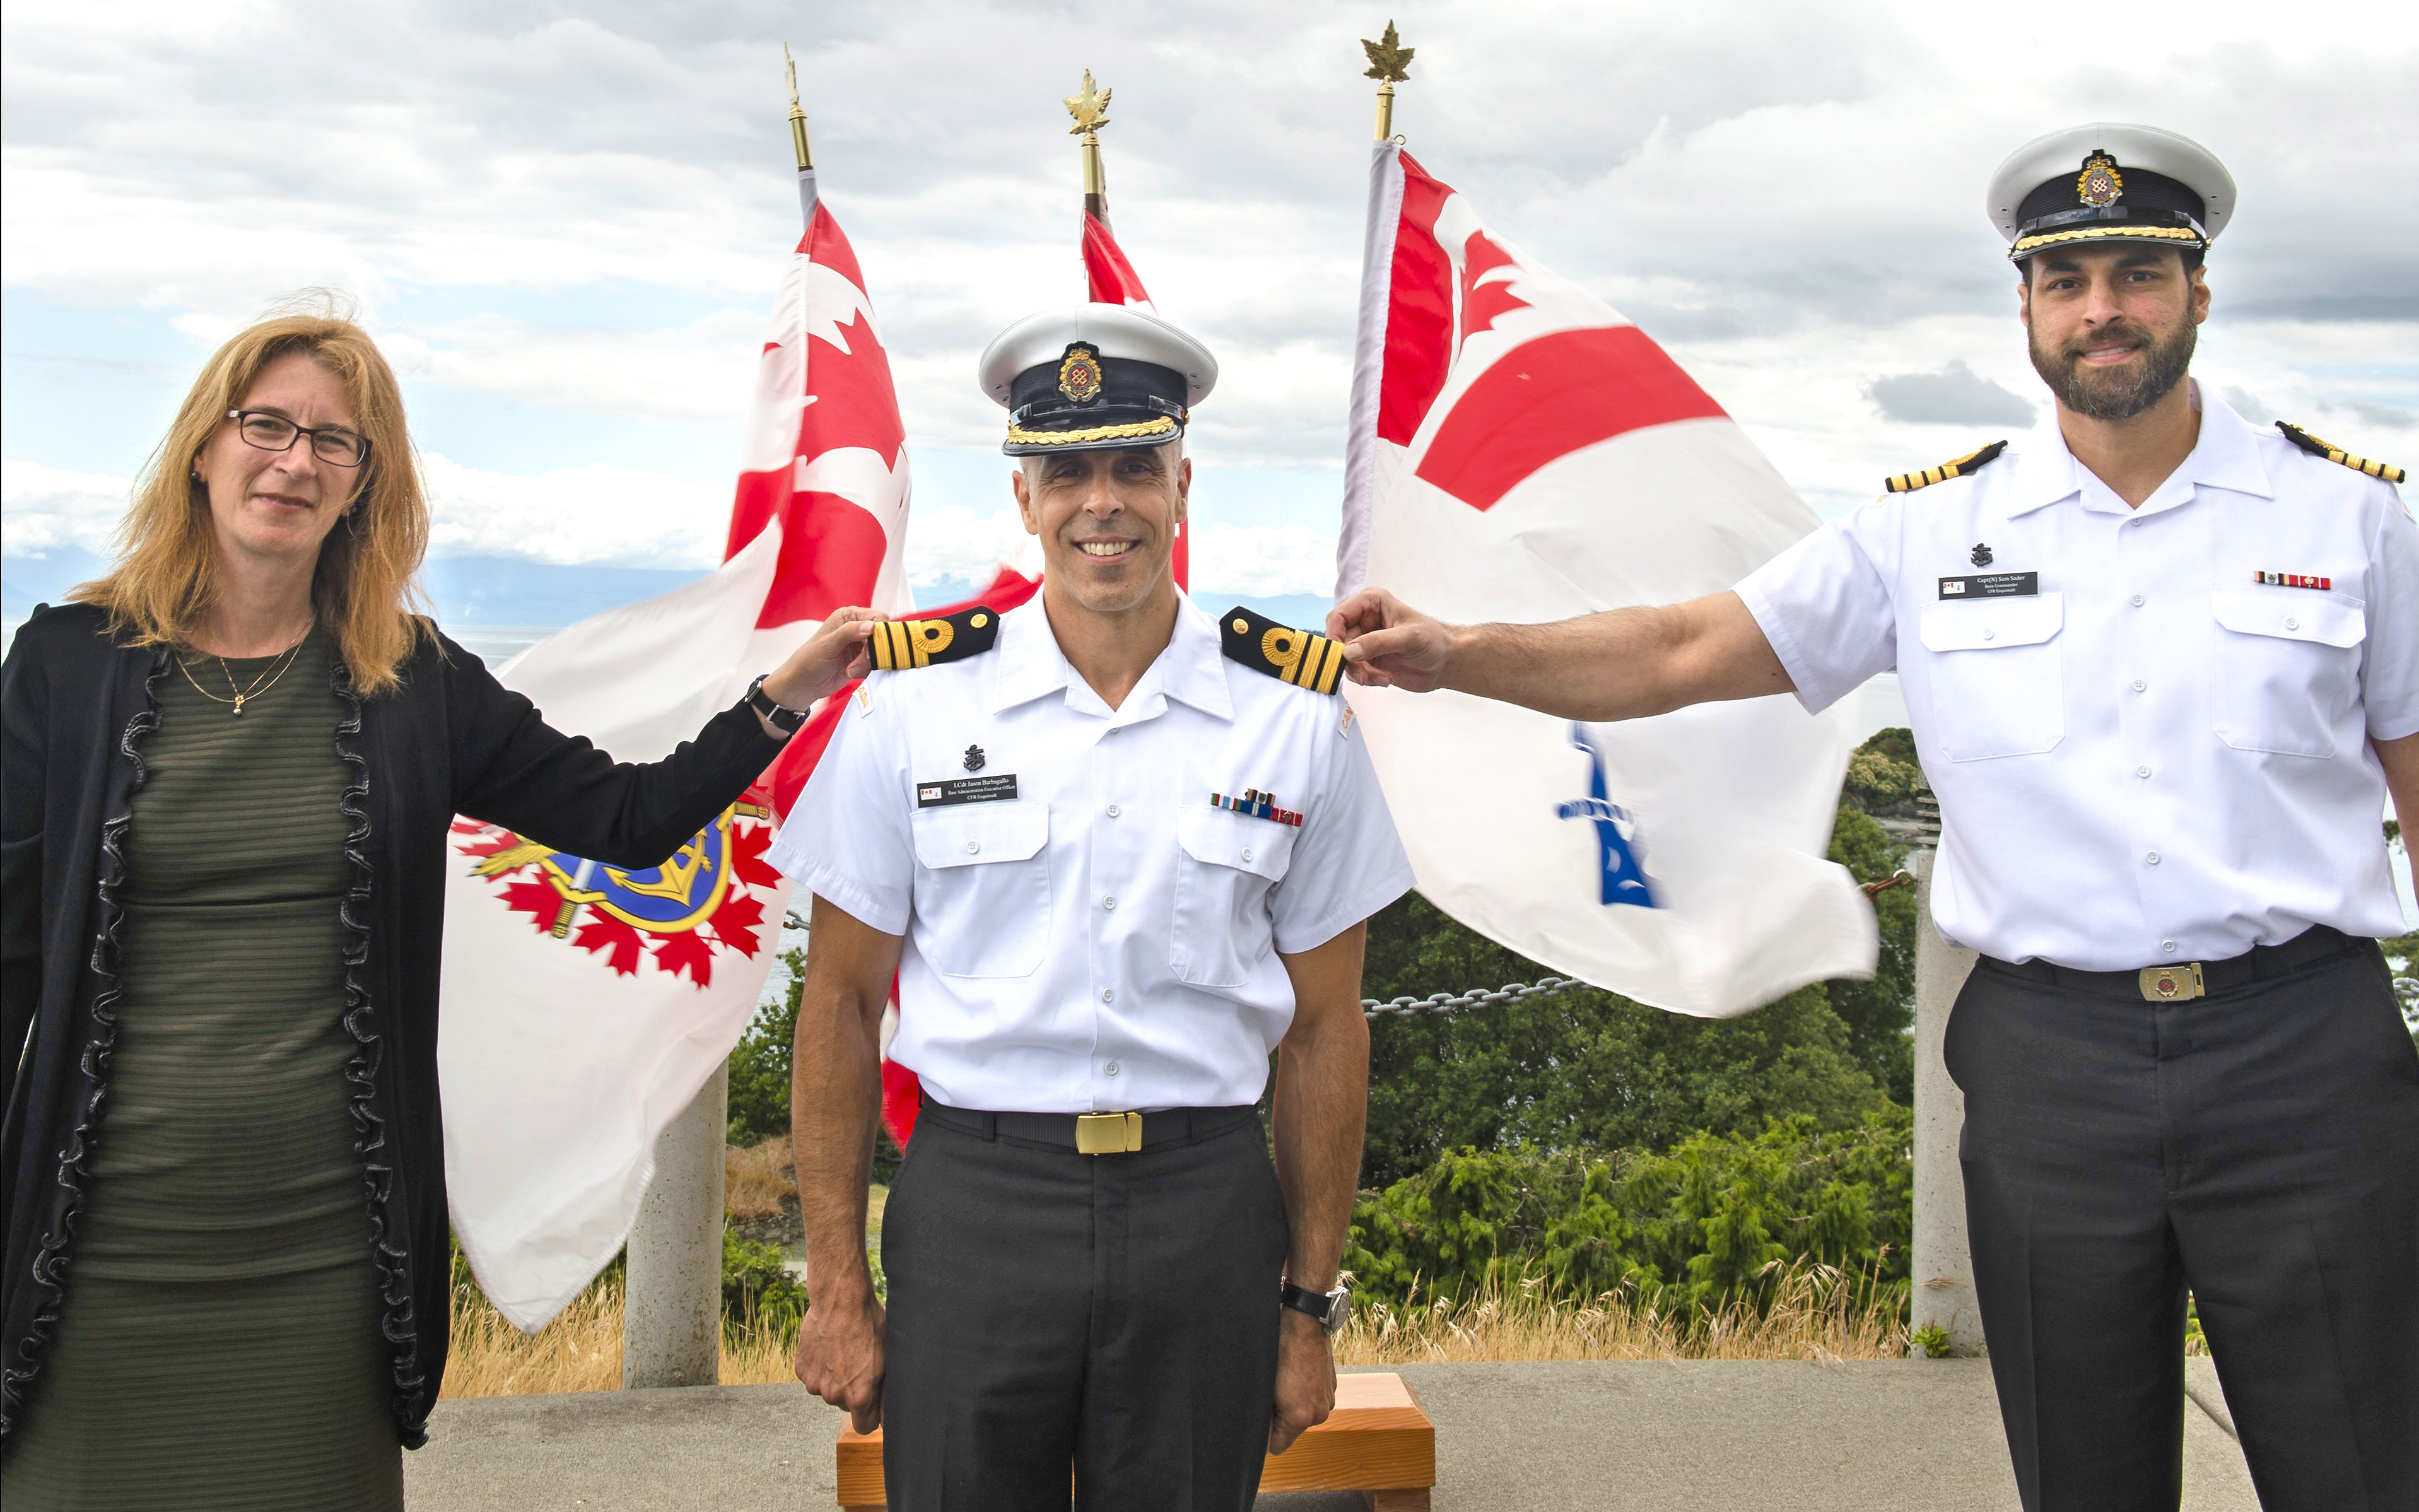 Commander Jason Barbagallo (middle), Base Administration Executive Officer, with his wife Chantal, is promoted to his current rank by Capt (Navy) Sam Sader, Base Commander, on June 16, 2020. Photos by LS Kendric C.W. Grasby, MARPAC Imaging Services